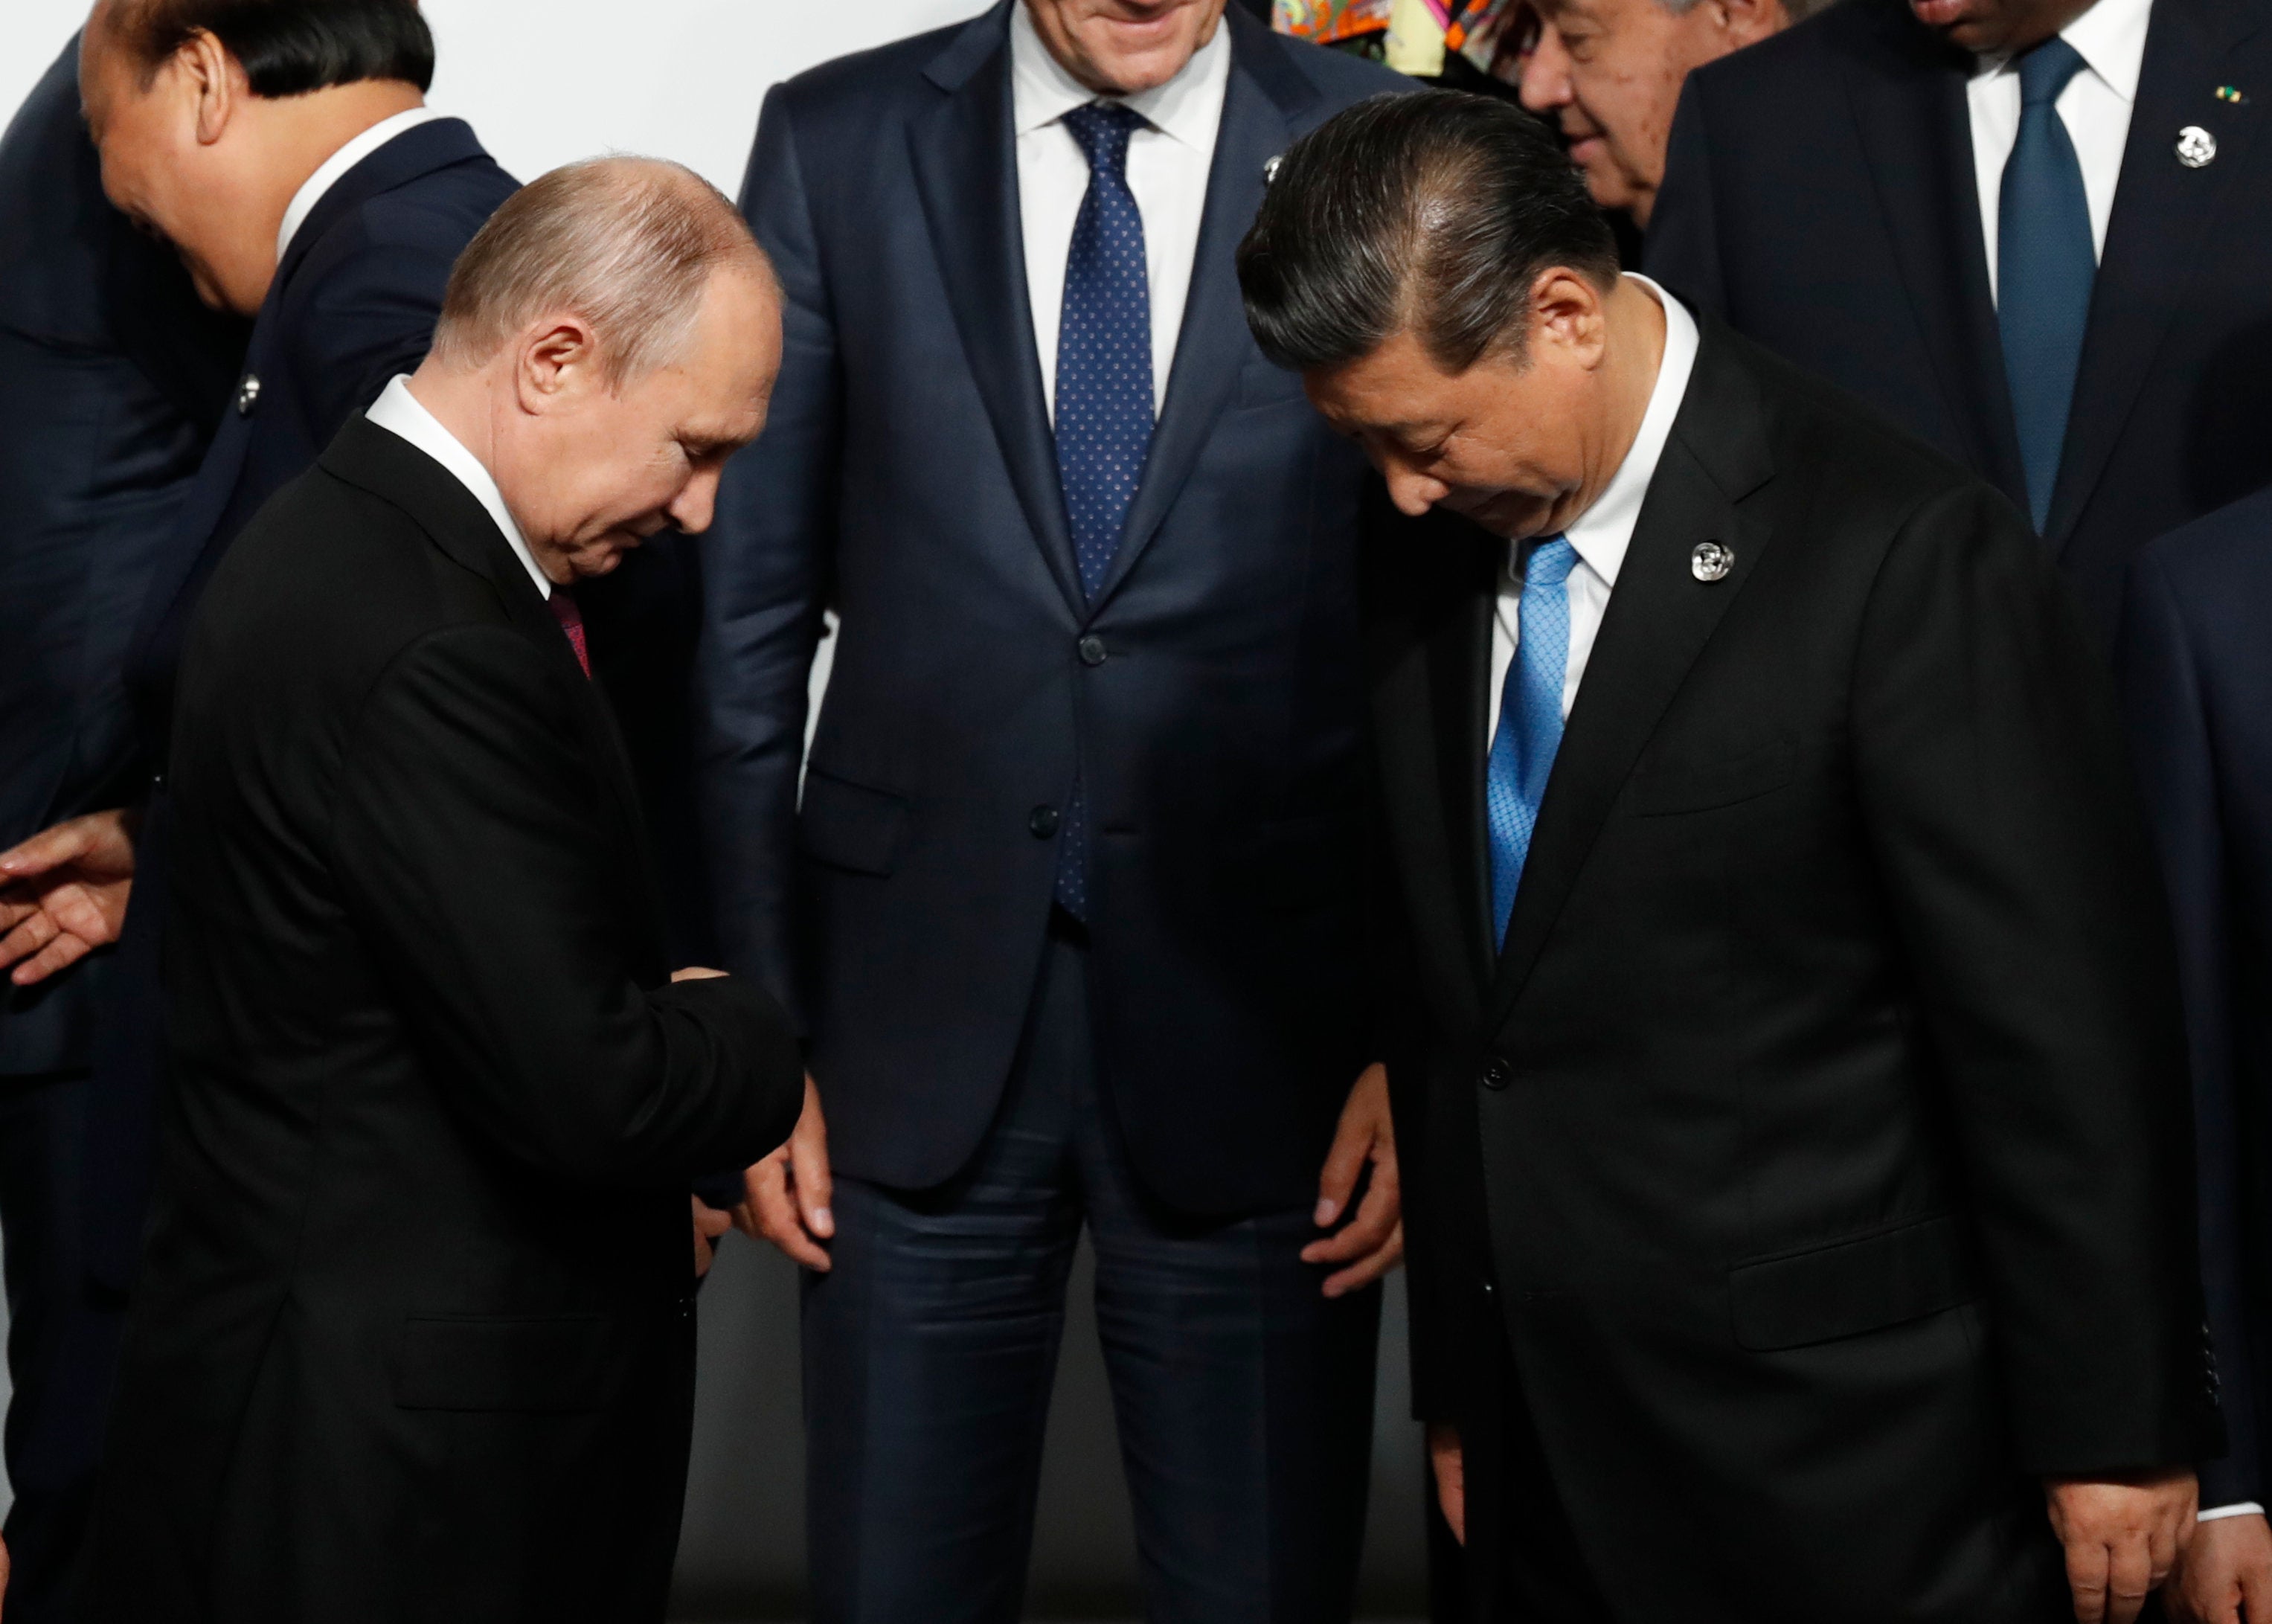 Russian president Vladimir Putin and Chinese president Xi Jinping at the G20 summit in 2019